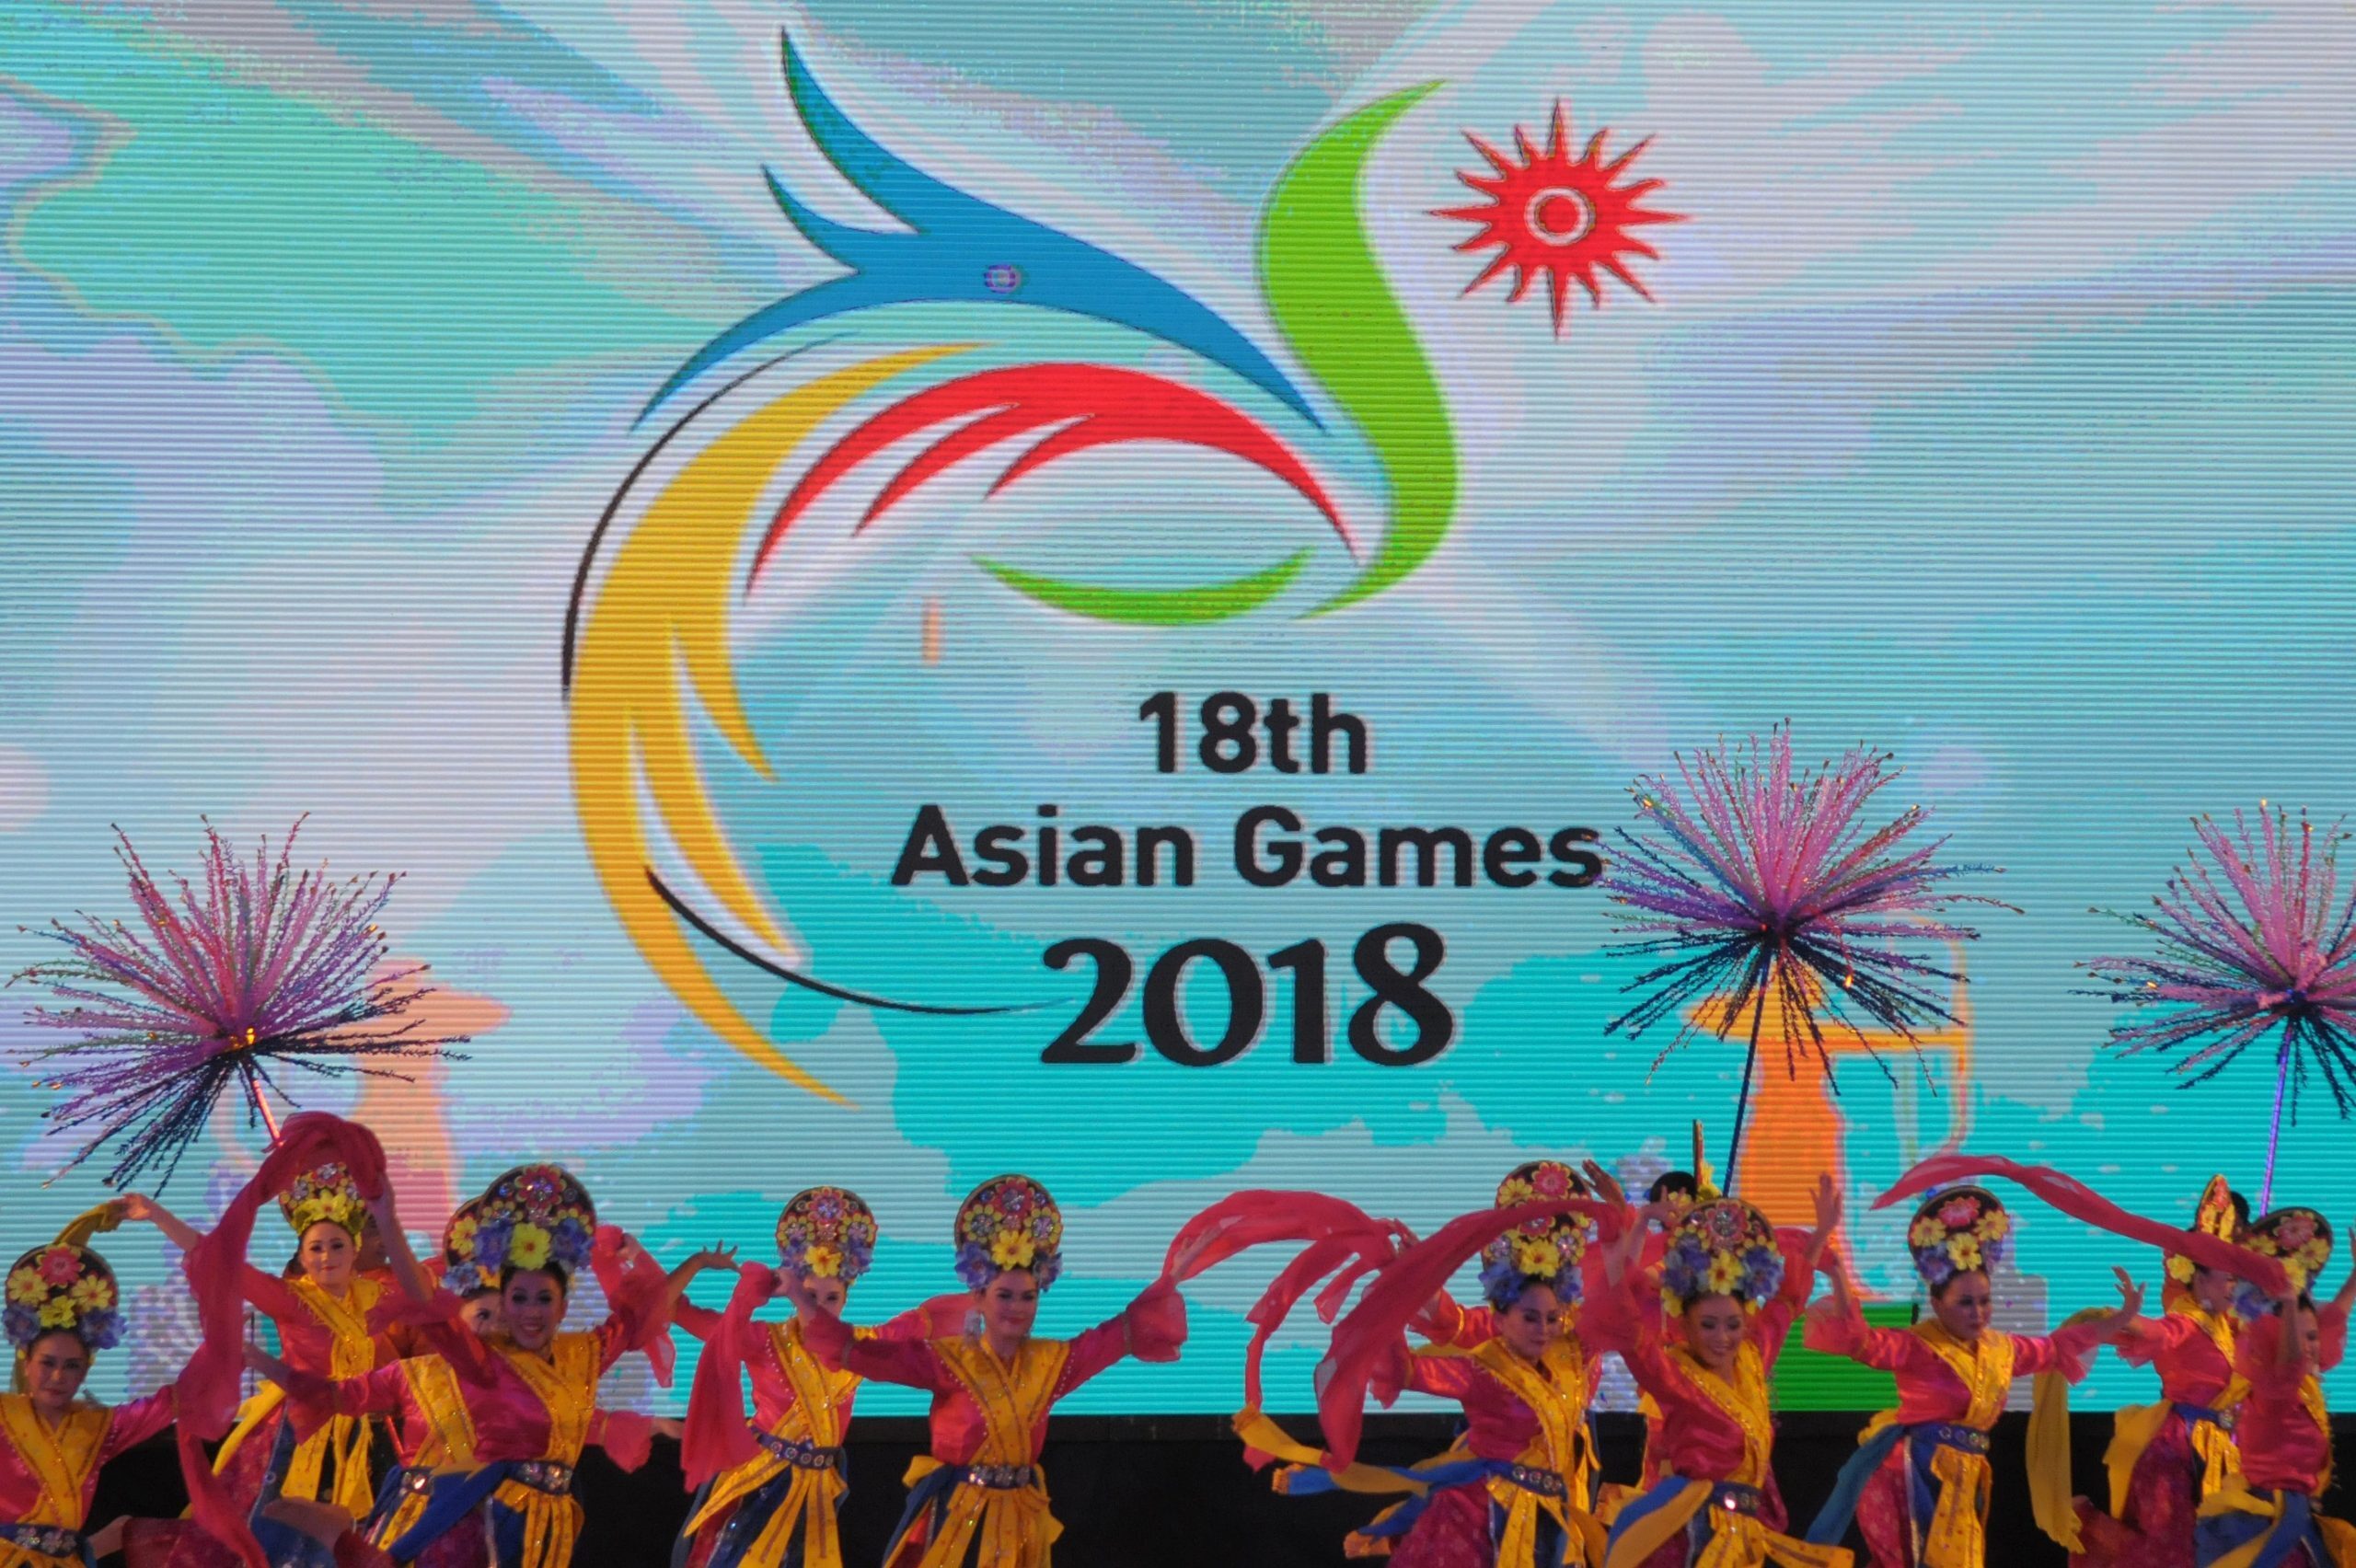 Indonesian dancers perform at the 2018 Asian Games (Photo credit should read STR/AFP/Getty Images)